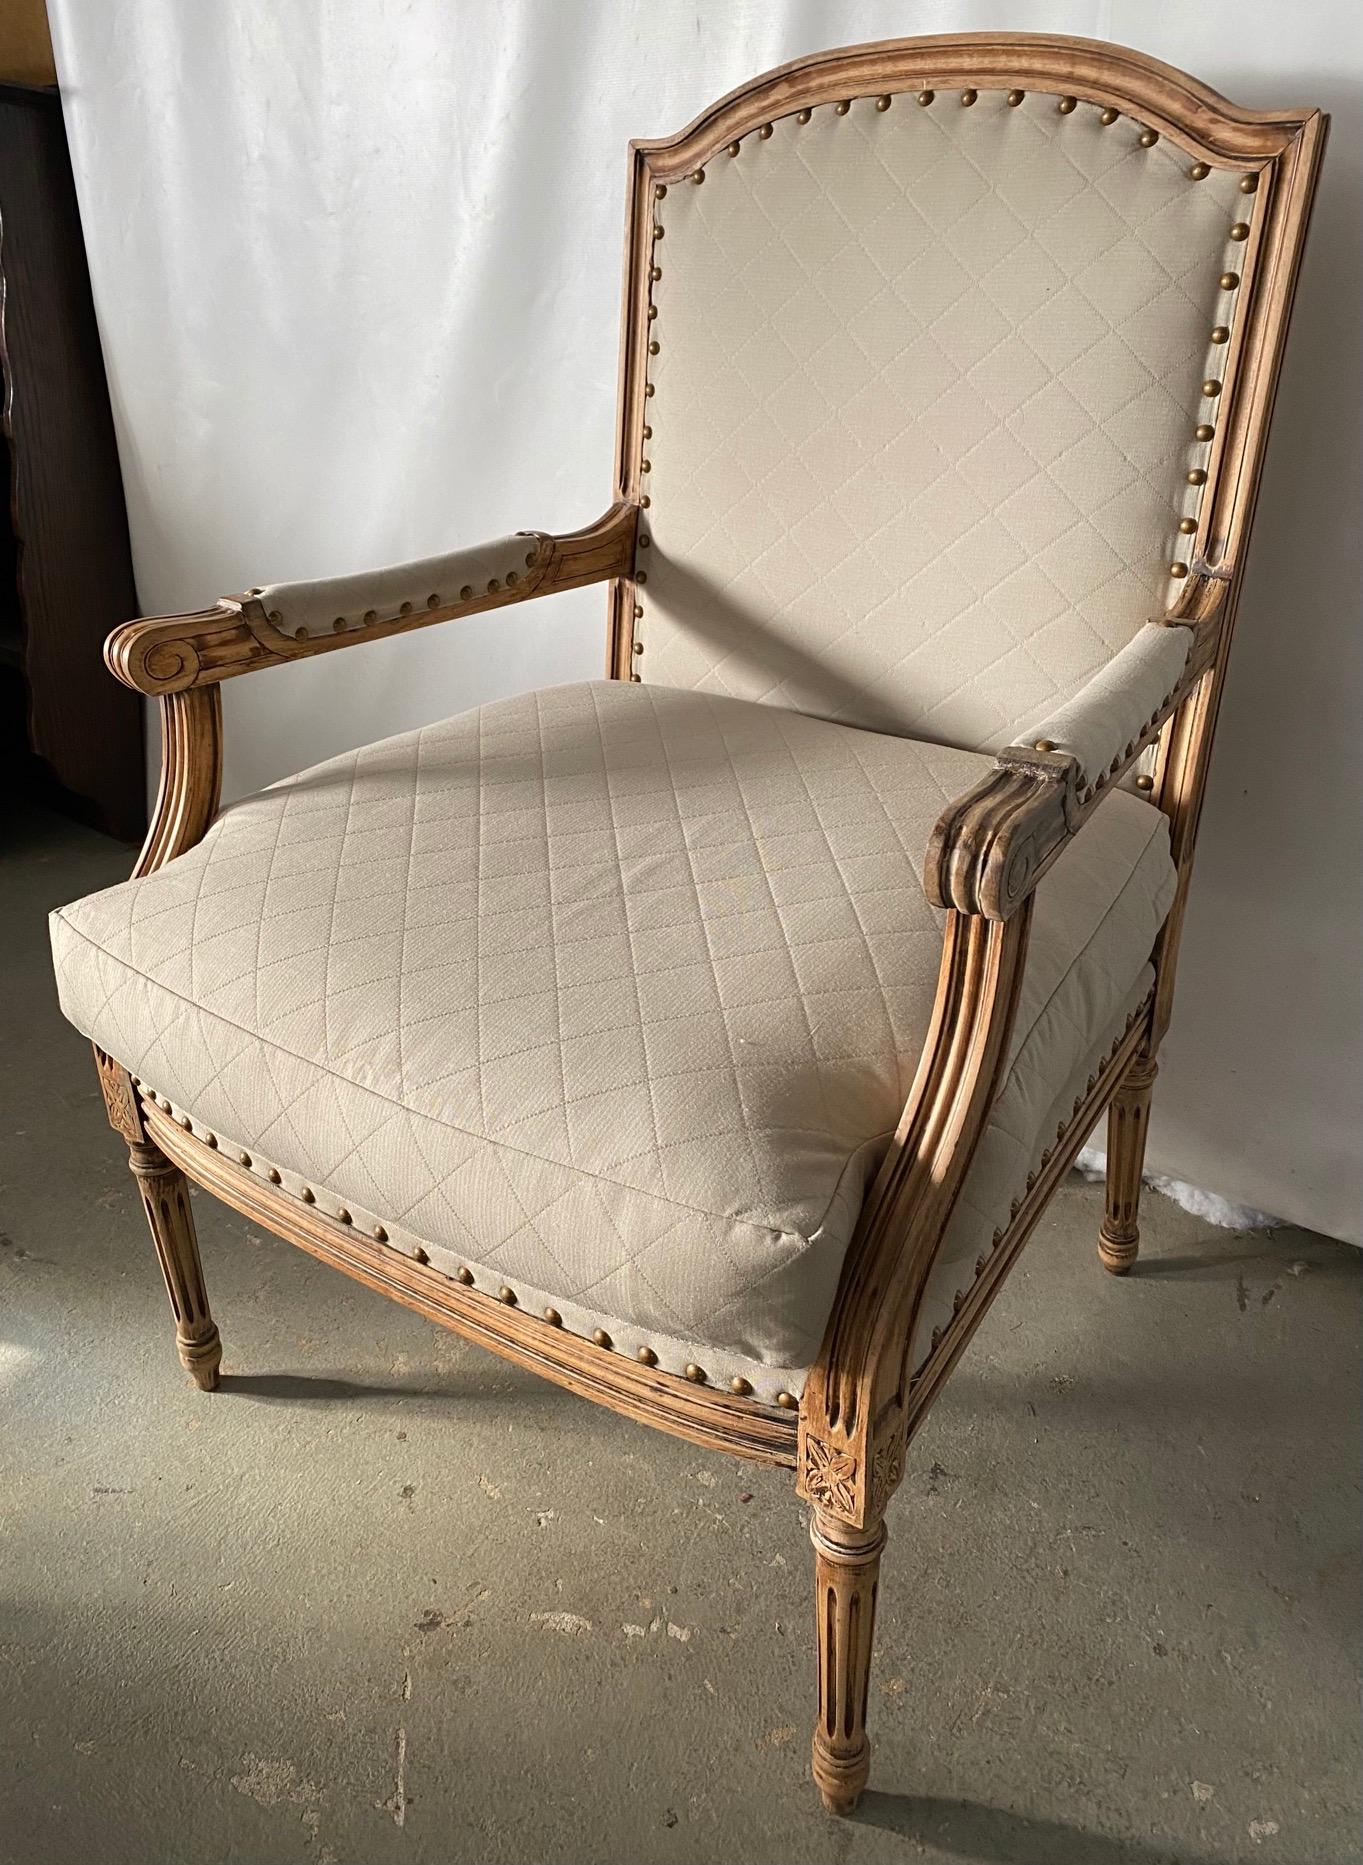 Elegant French Louis XVI style armchair with complementary side chair in bleached wood frames, fluted leg and cubic blocks decorated with florets, upholstered in classic beige quilted fabric. Appropriate for dining, desk or vanity chair in a modern,